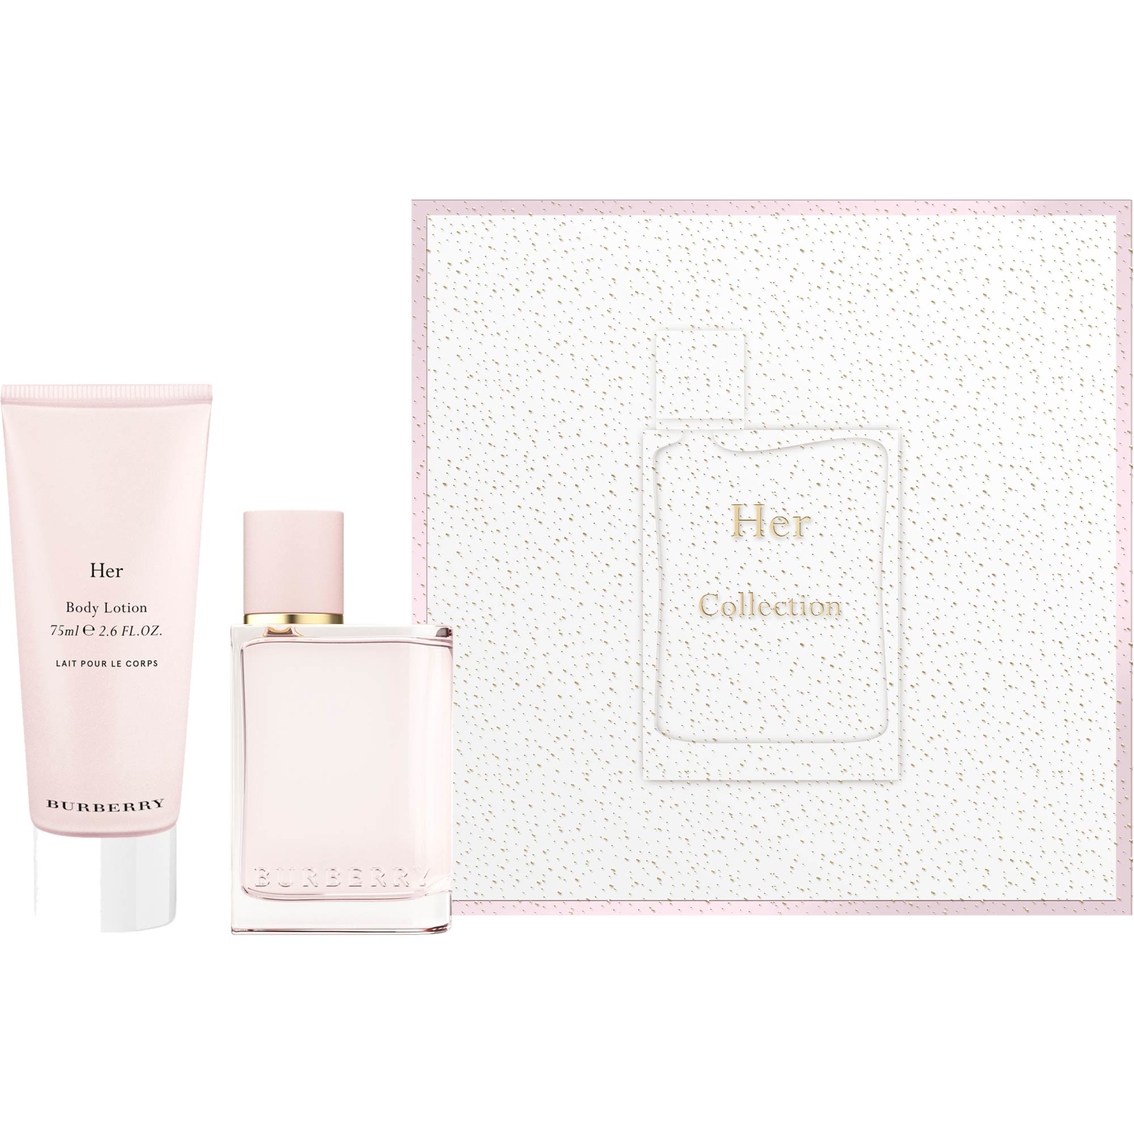 Burberry Her Gift Set | Gifts Sets For 